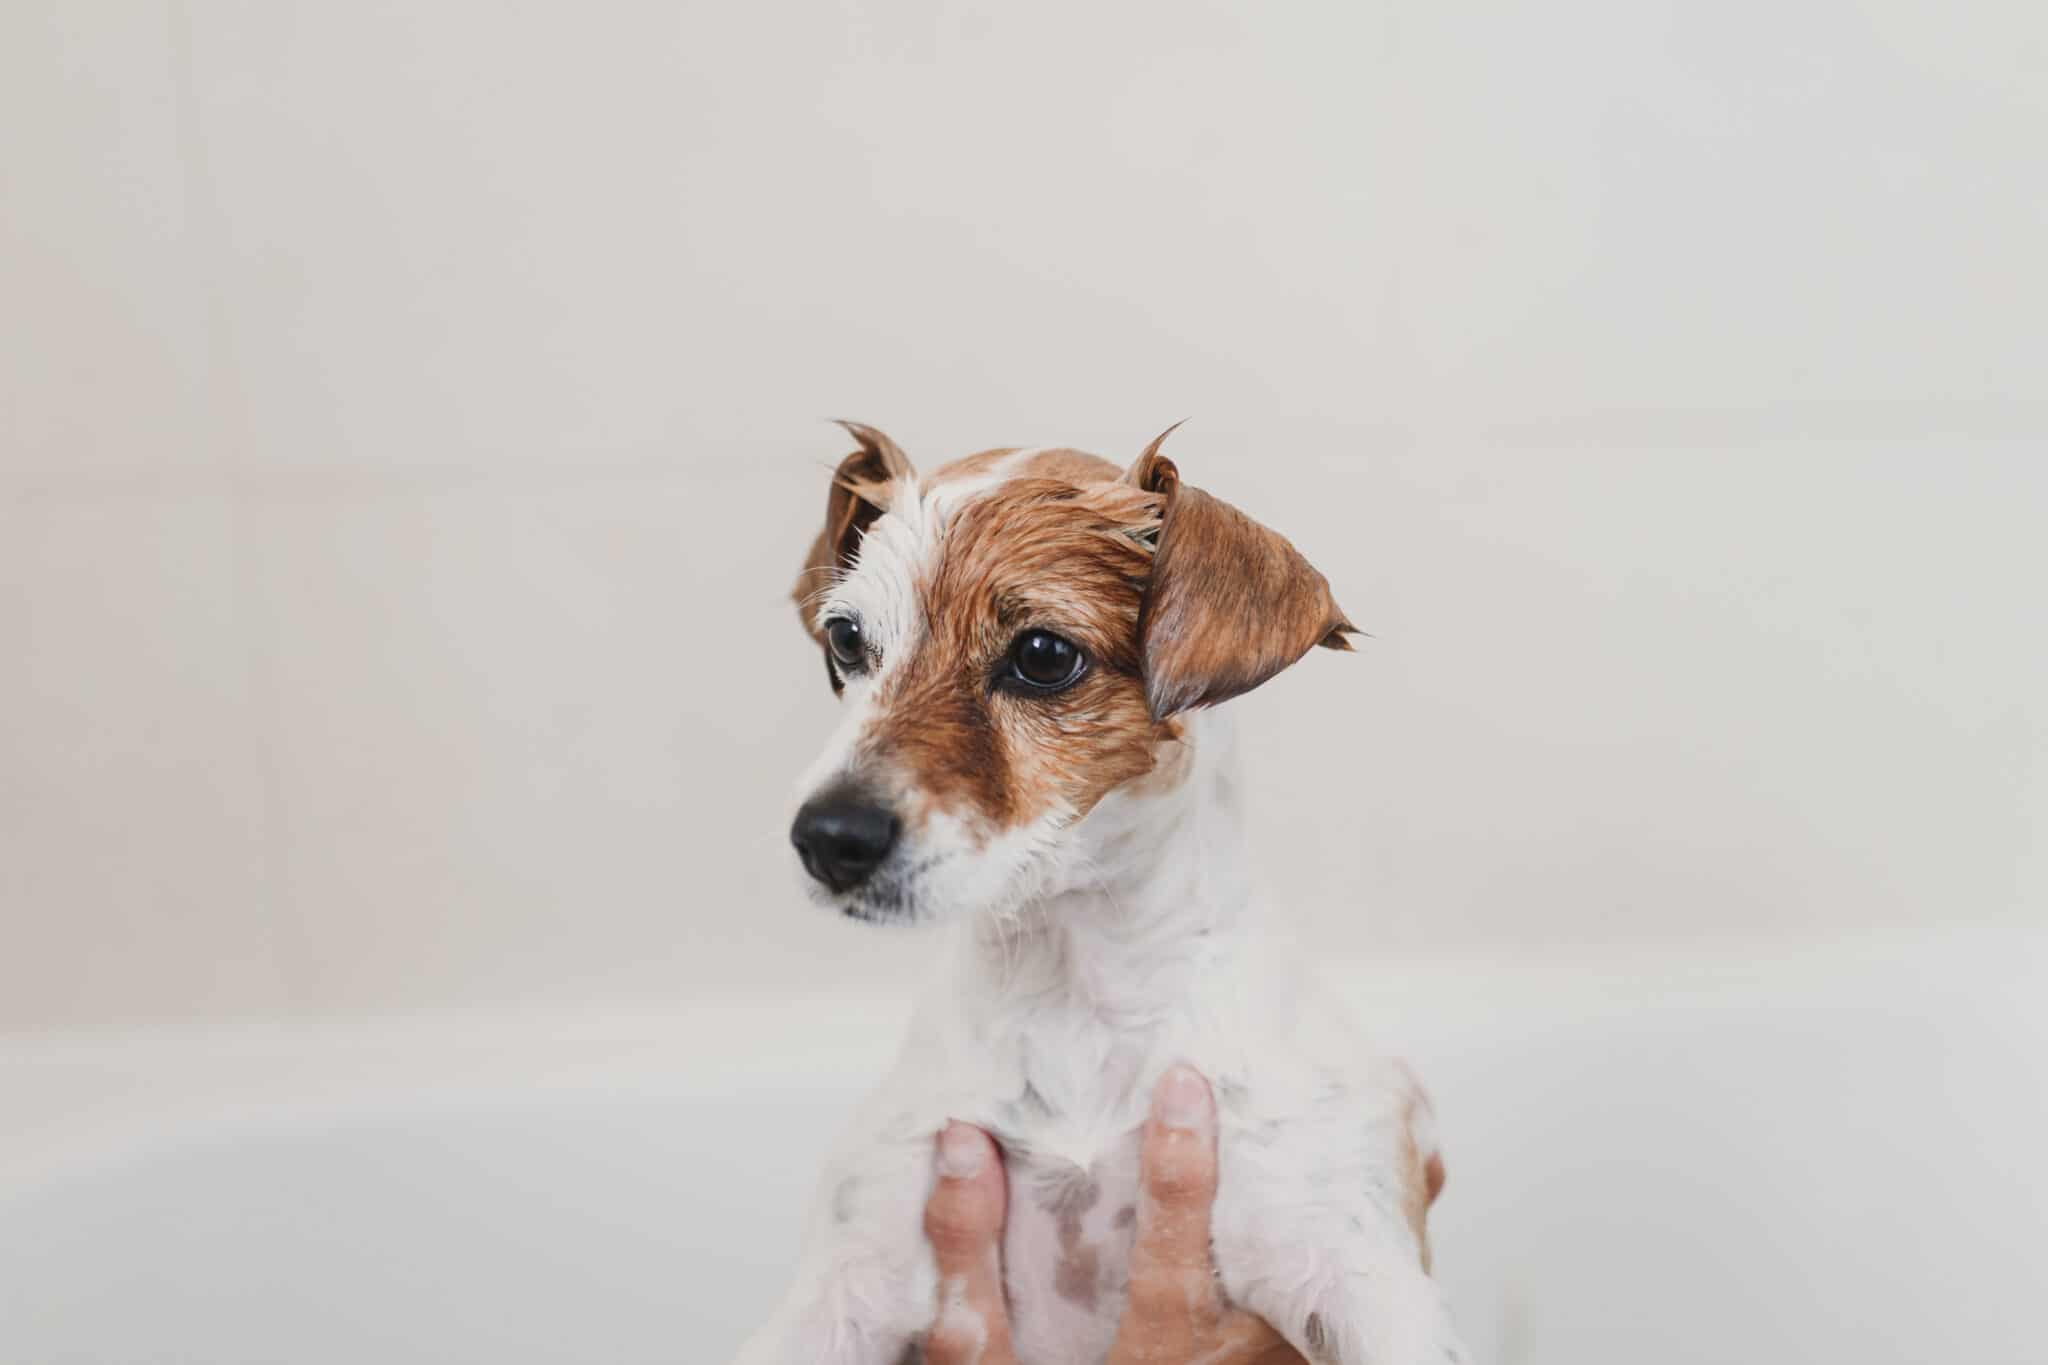 Is Burt’s Bees dog shampoo safe for puppies?